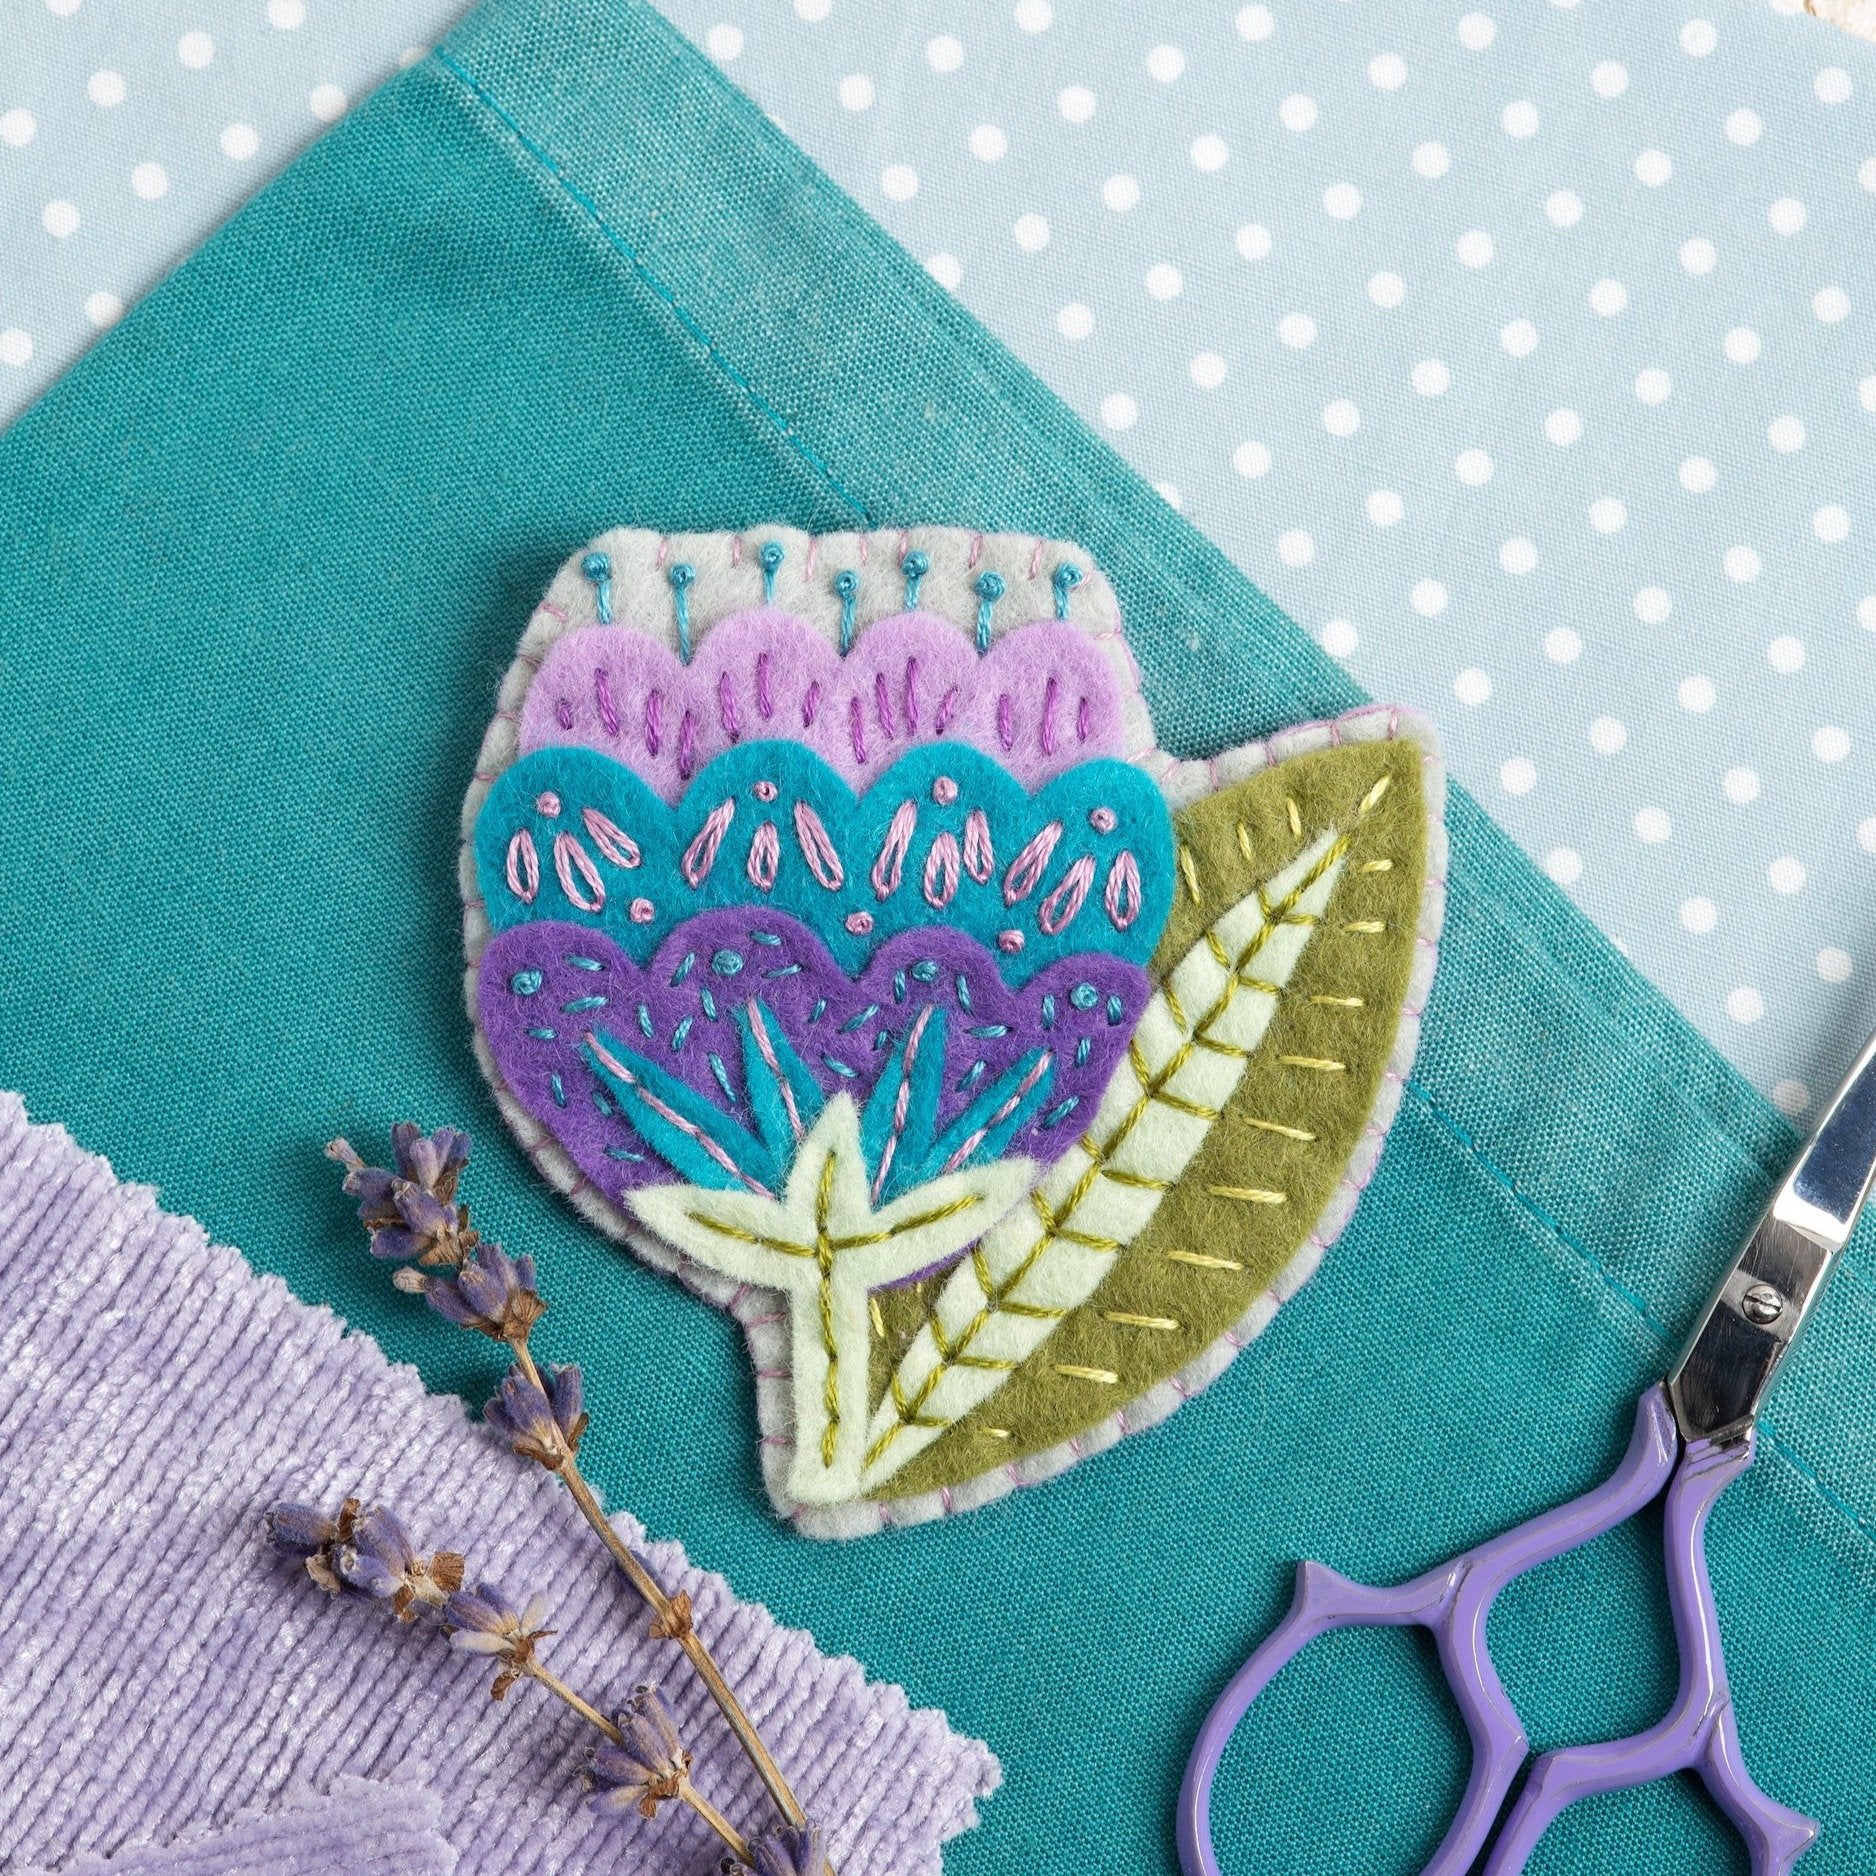 Vita flower felt craft brooch kit displayed on pale blue polka dot background, teal and lilac fabric squares and purple scissors.